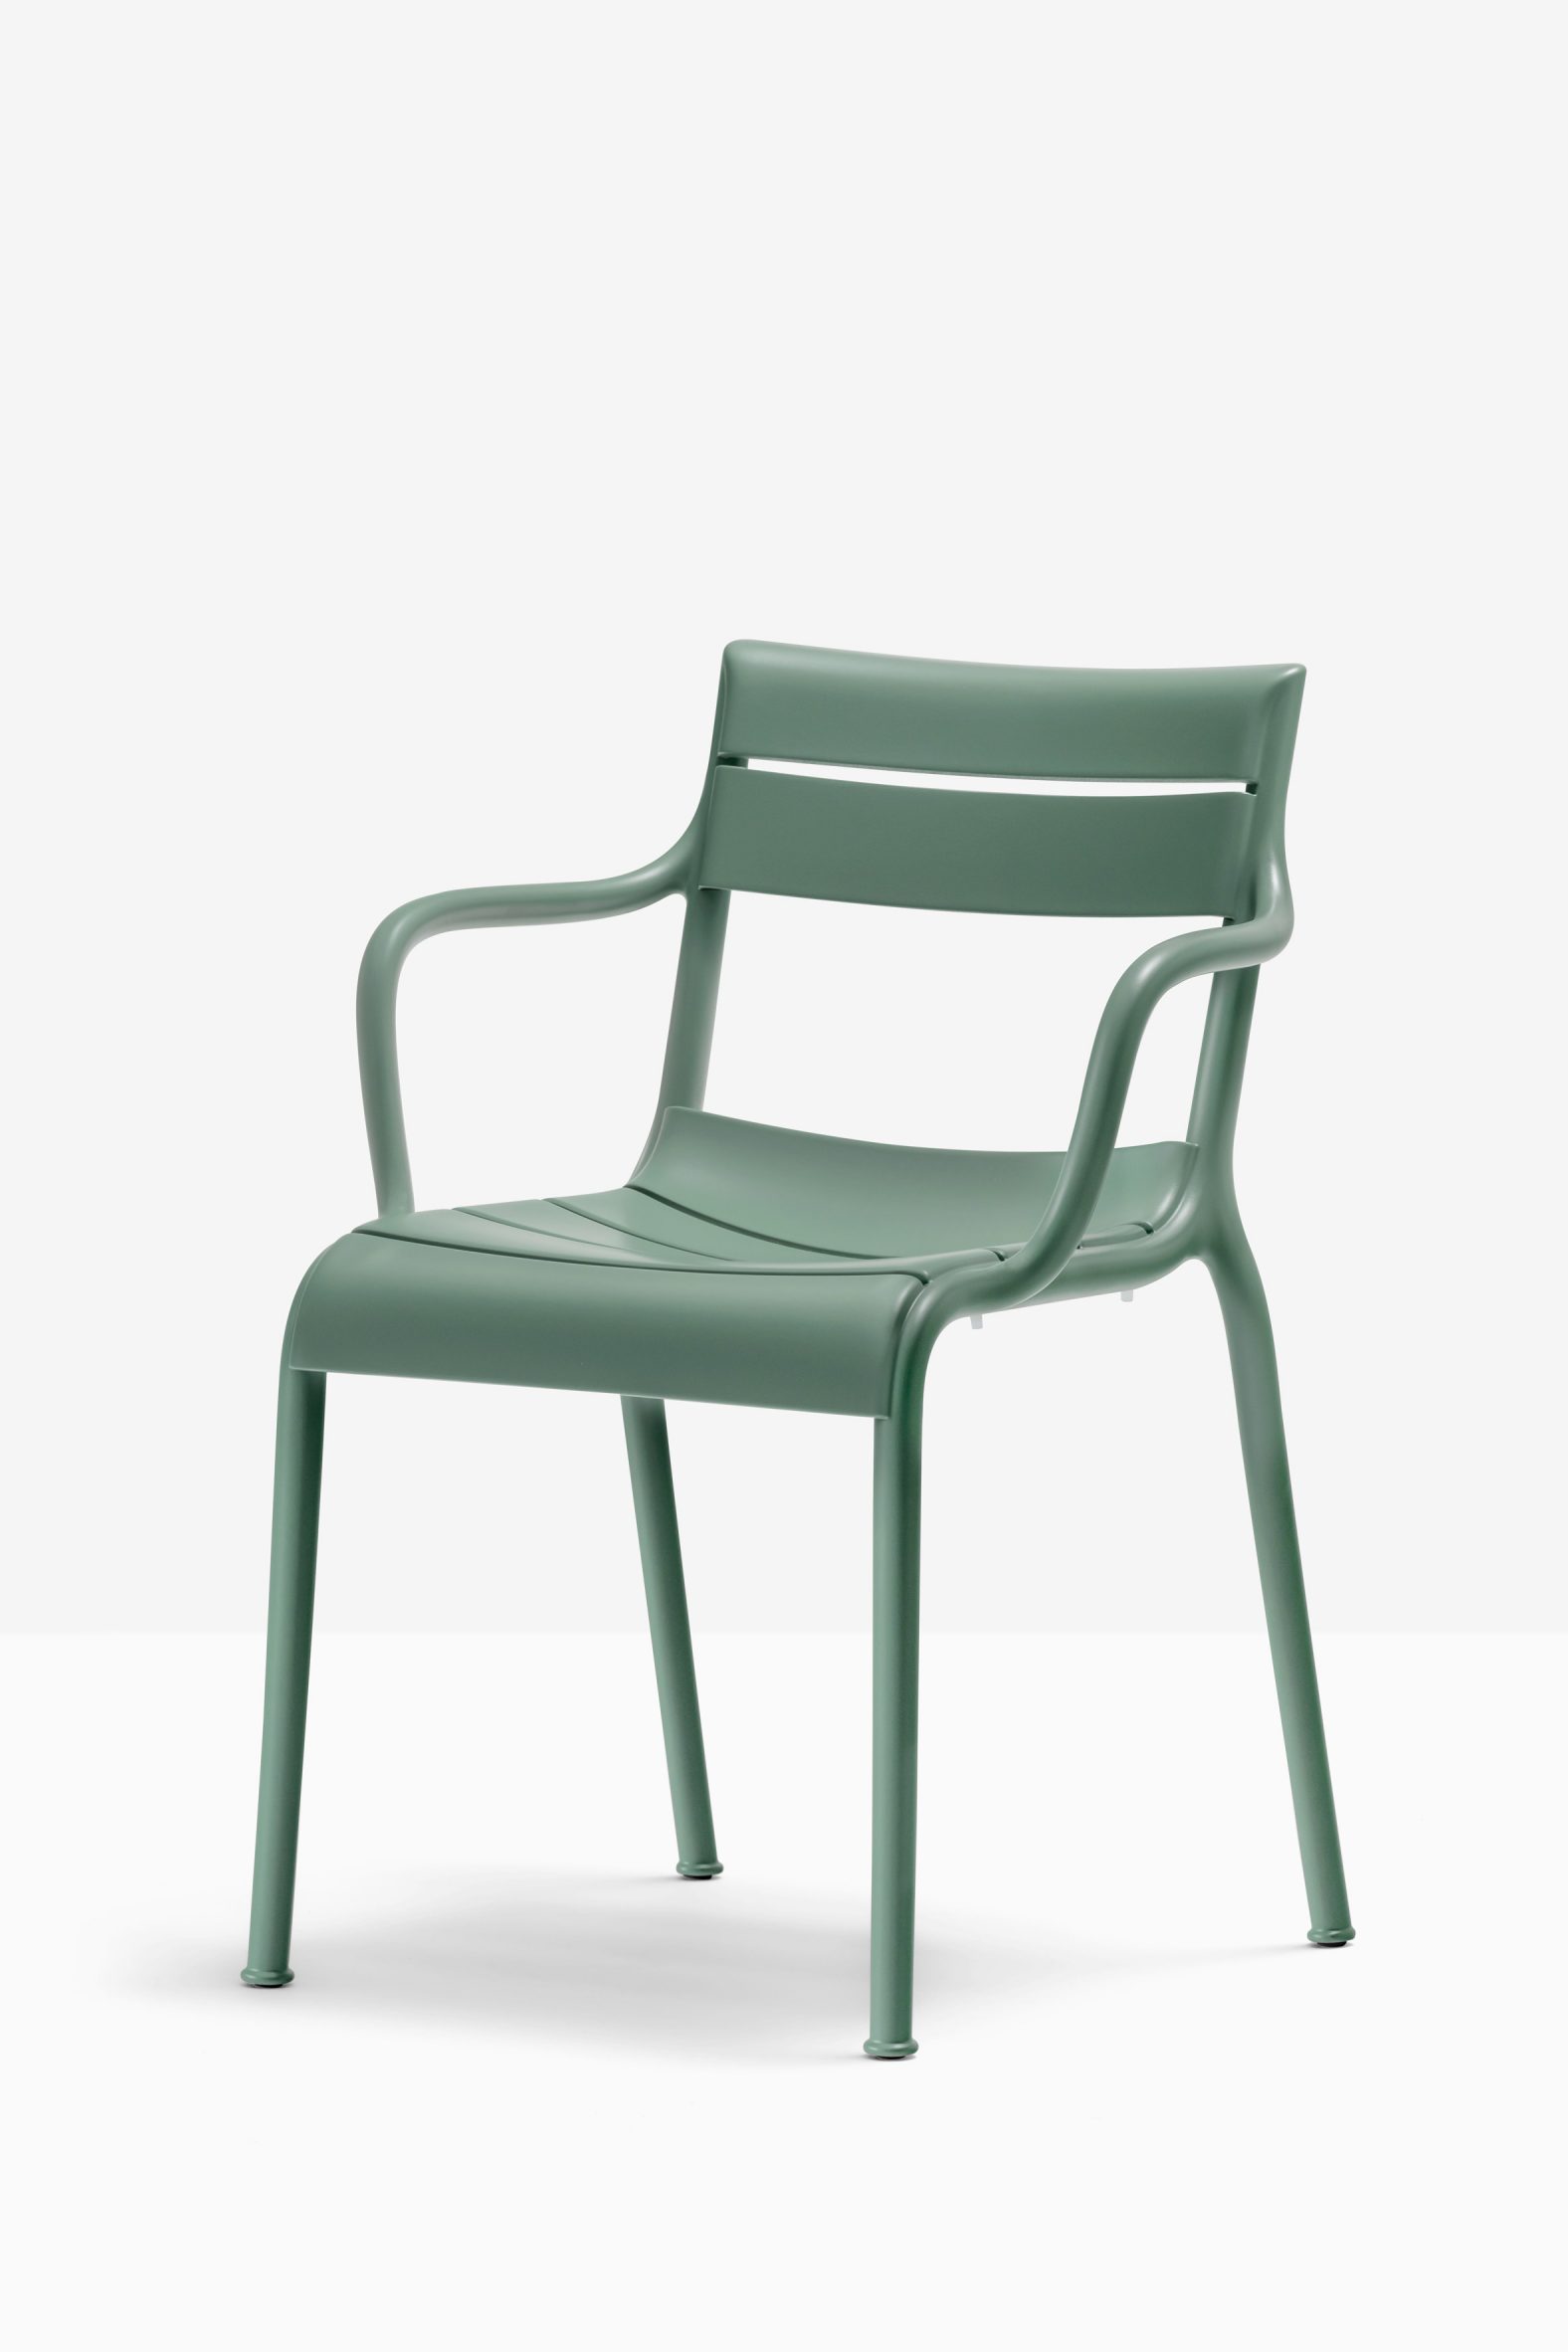 Souvenir armchair in green, front view on white background